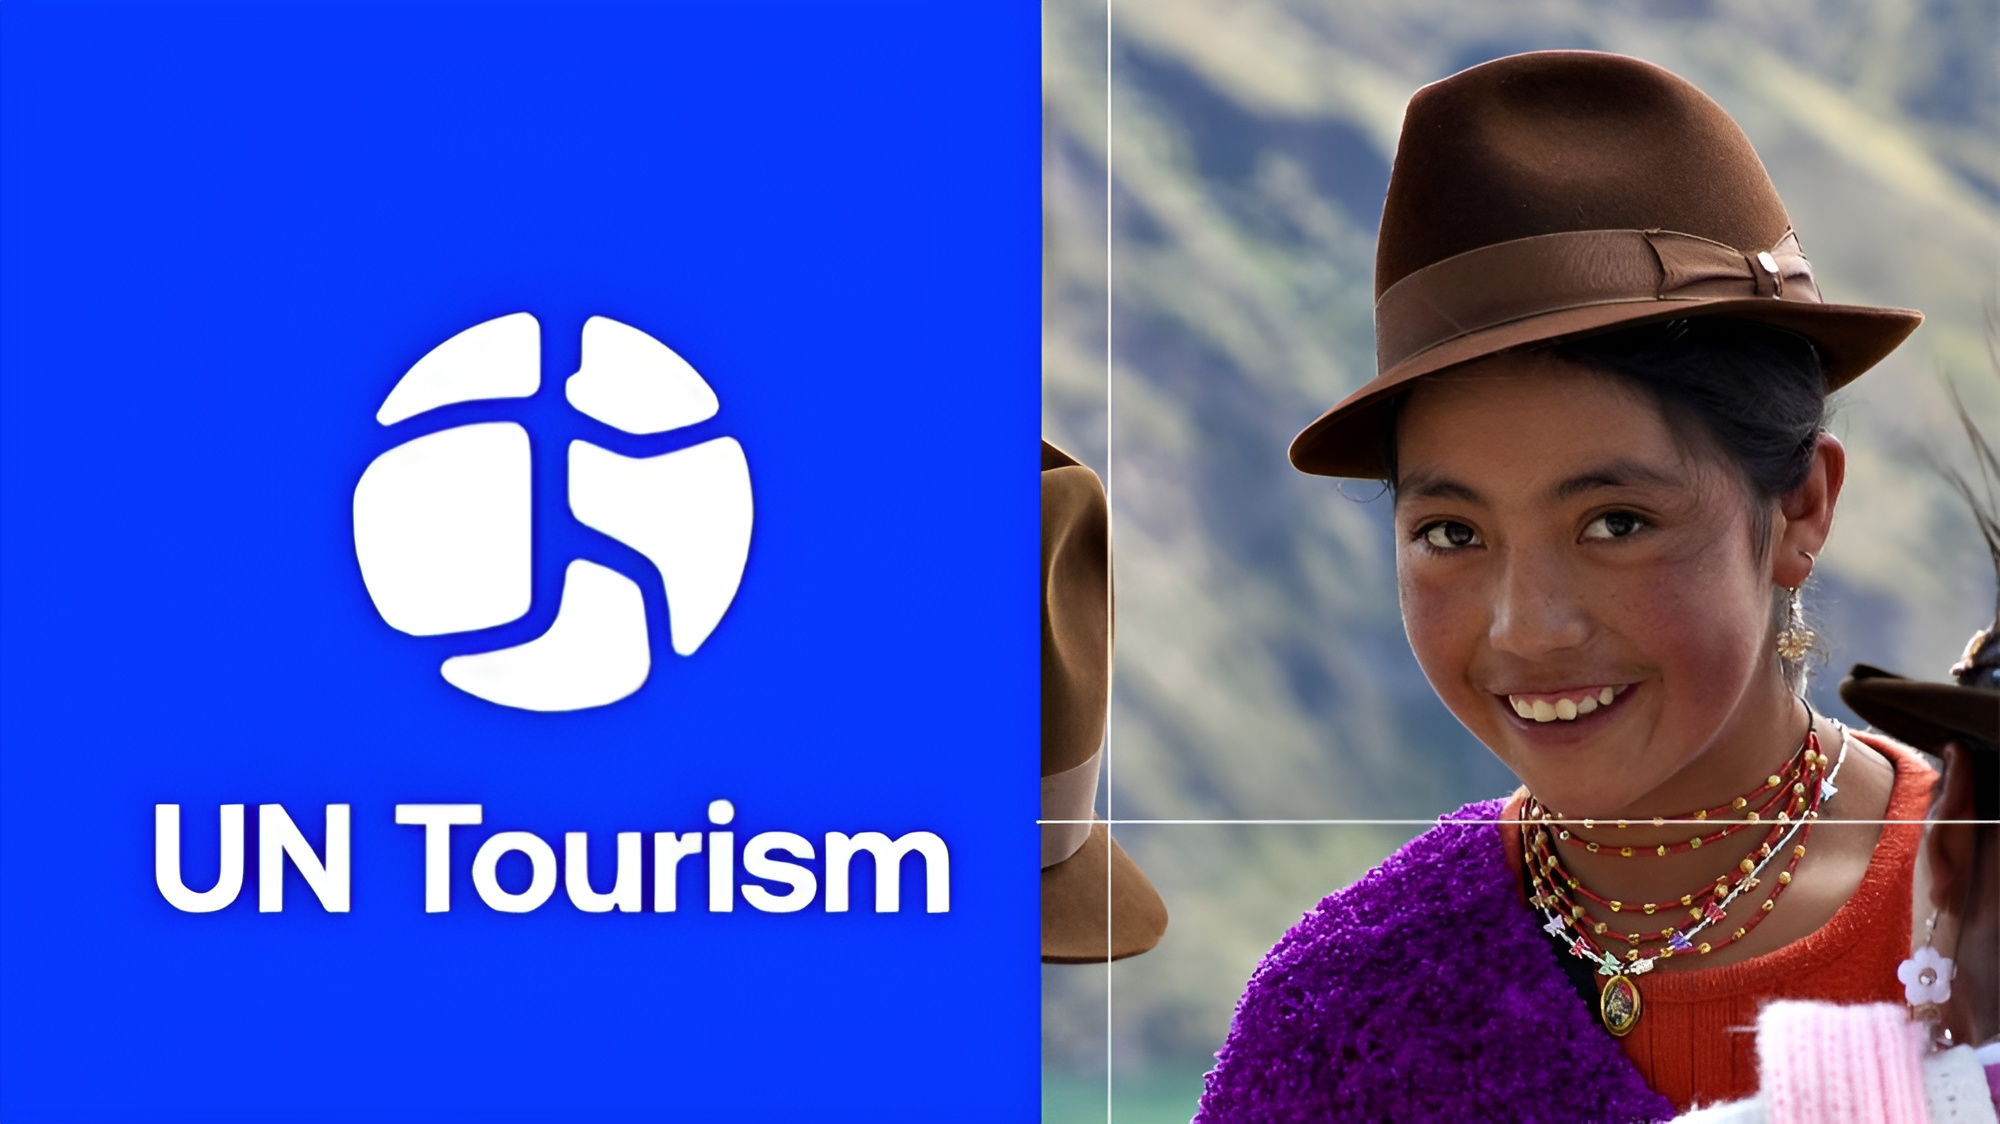 UNWTO transitions to UN Tourism